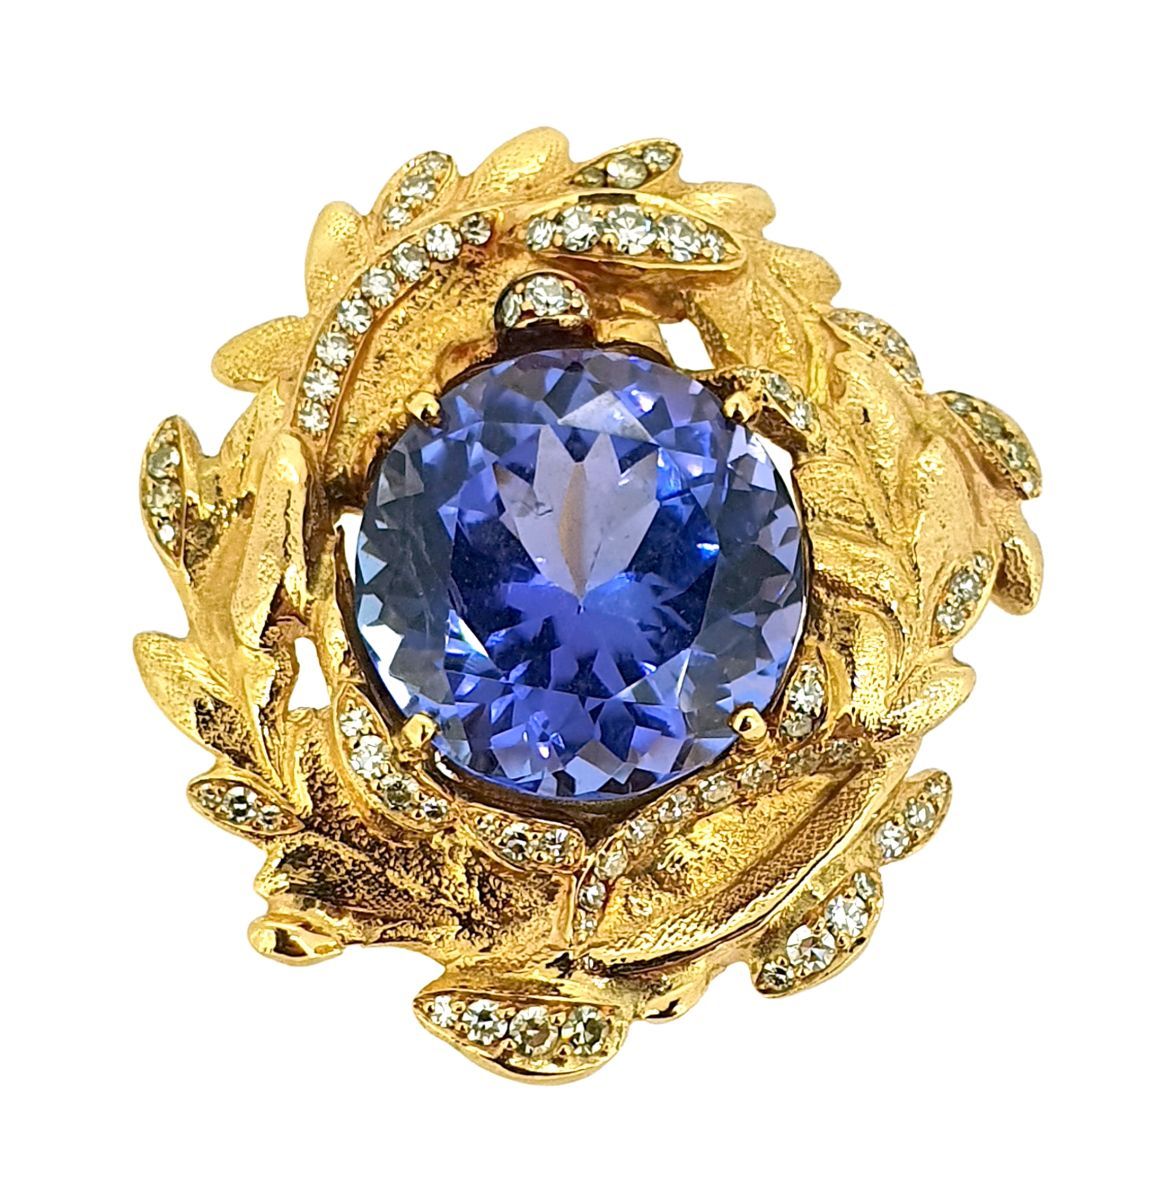 BAGUE TANZANITE An 18k (750) yellow gold ring set with a round tanzanite in a fo&hellip;